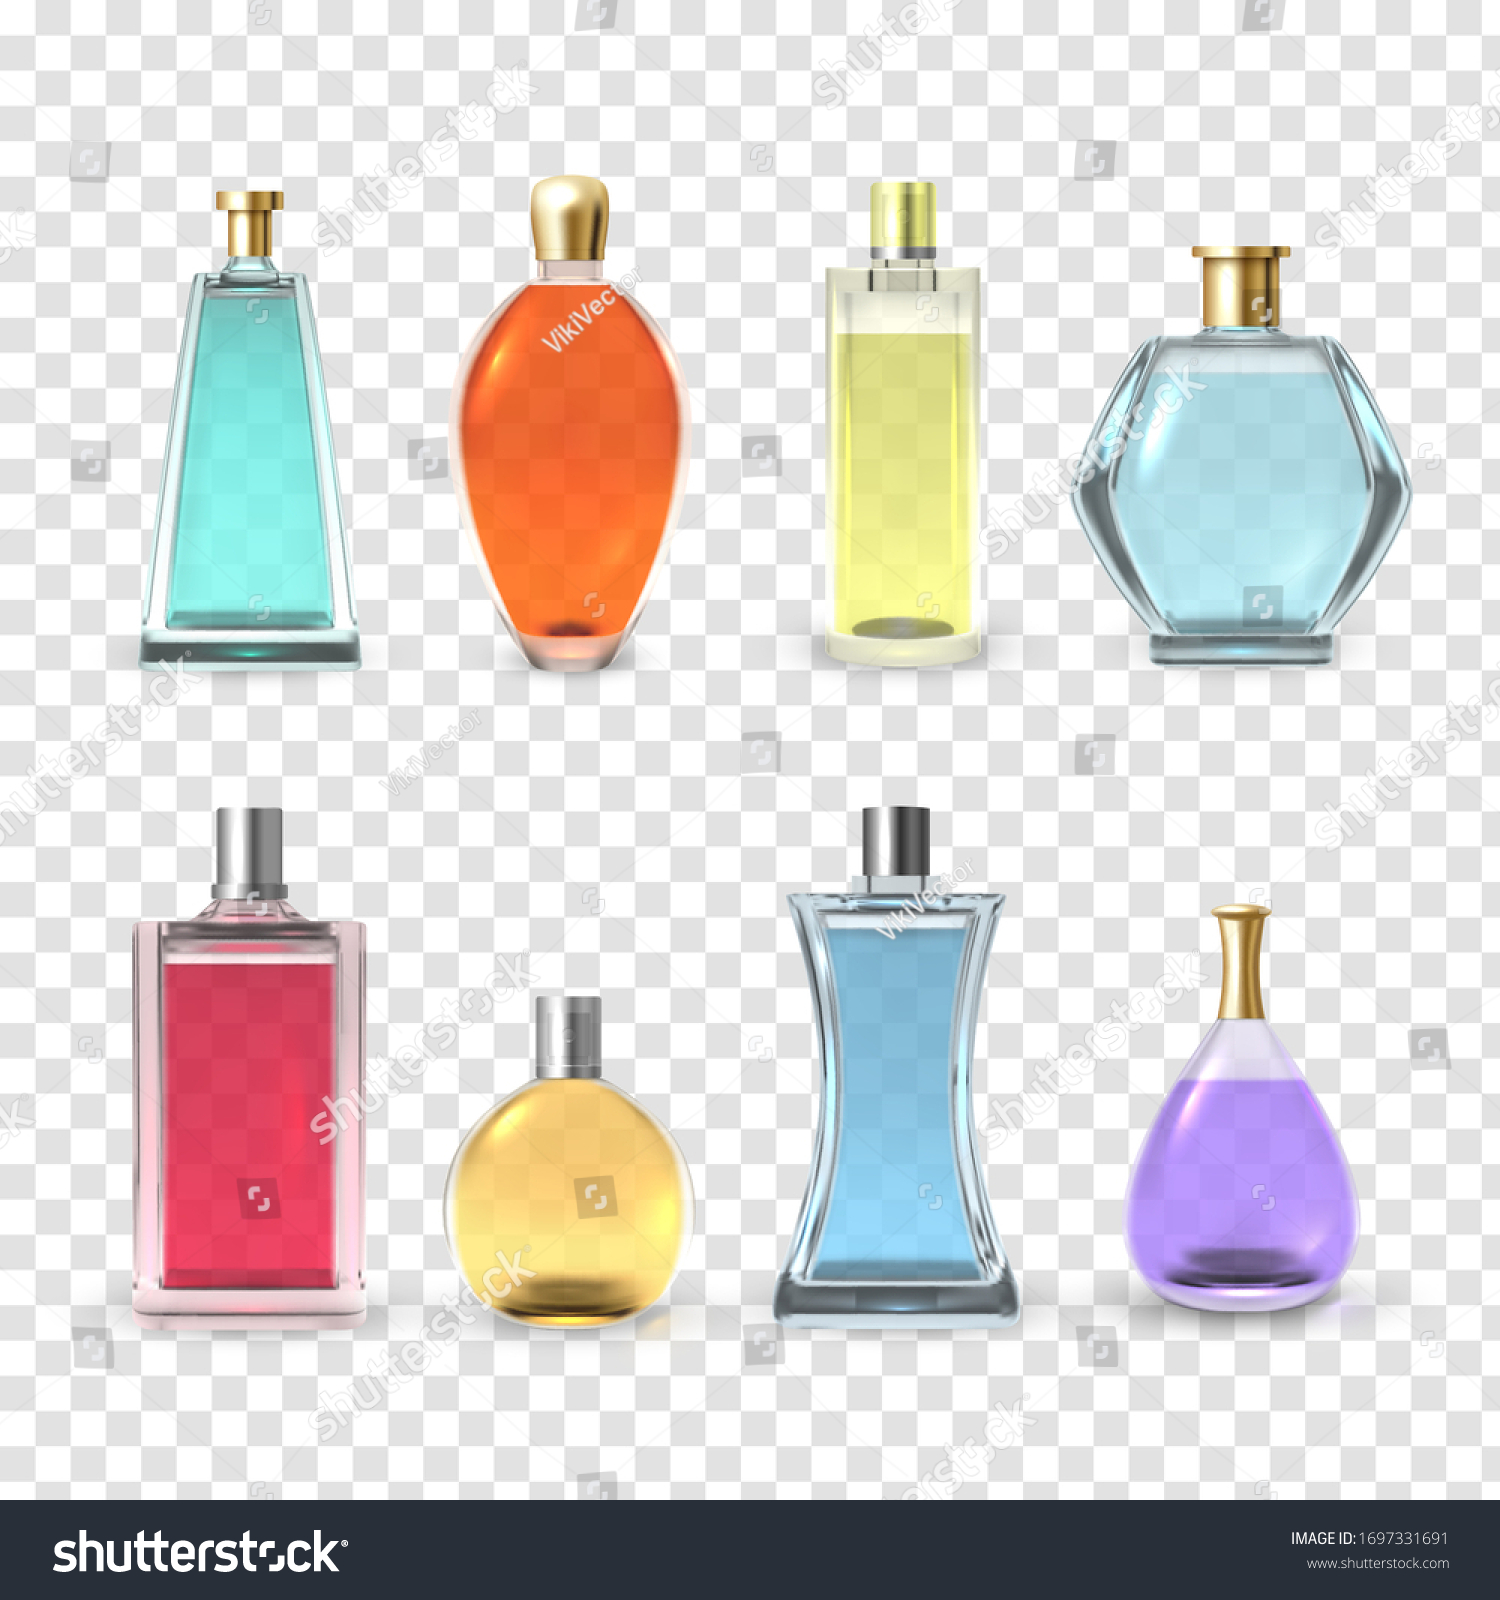 SVG of Perfume bottles set, aroma and fragrance collection. Aromatherapy tubes. Vector realistic perfume illustration on white background svg